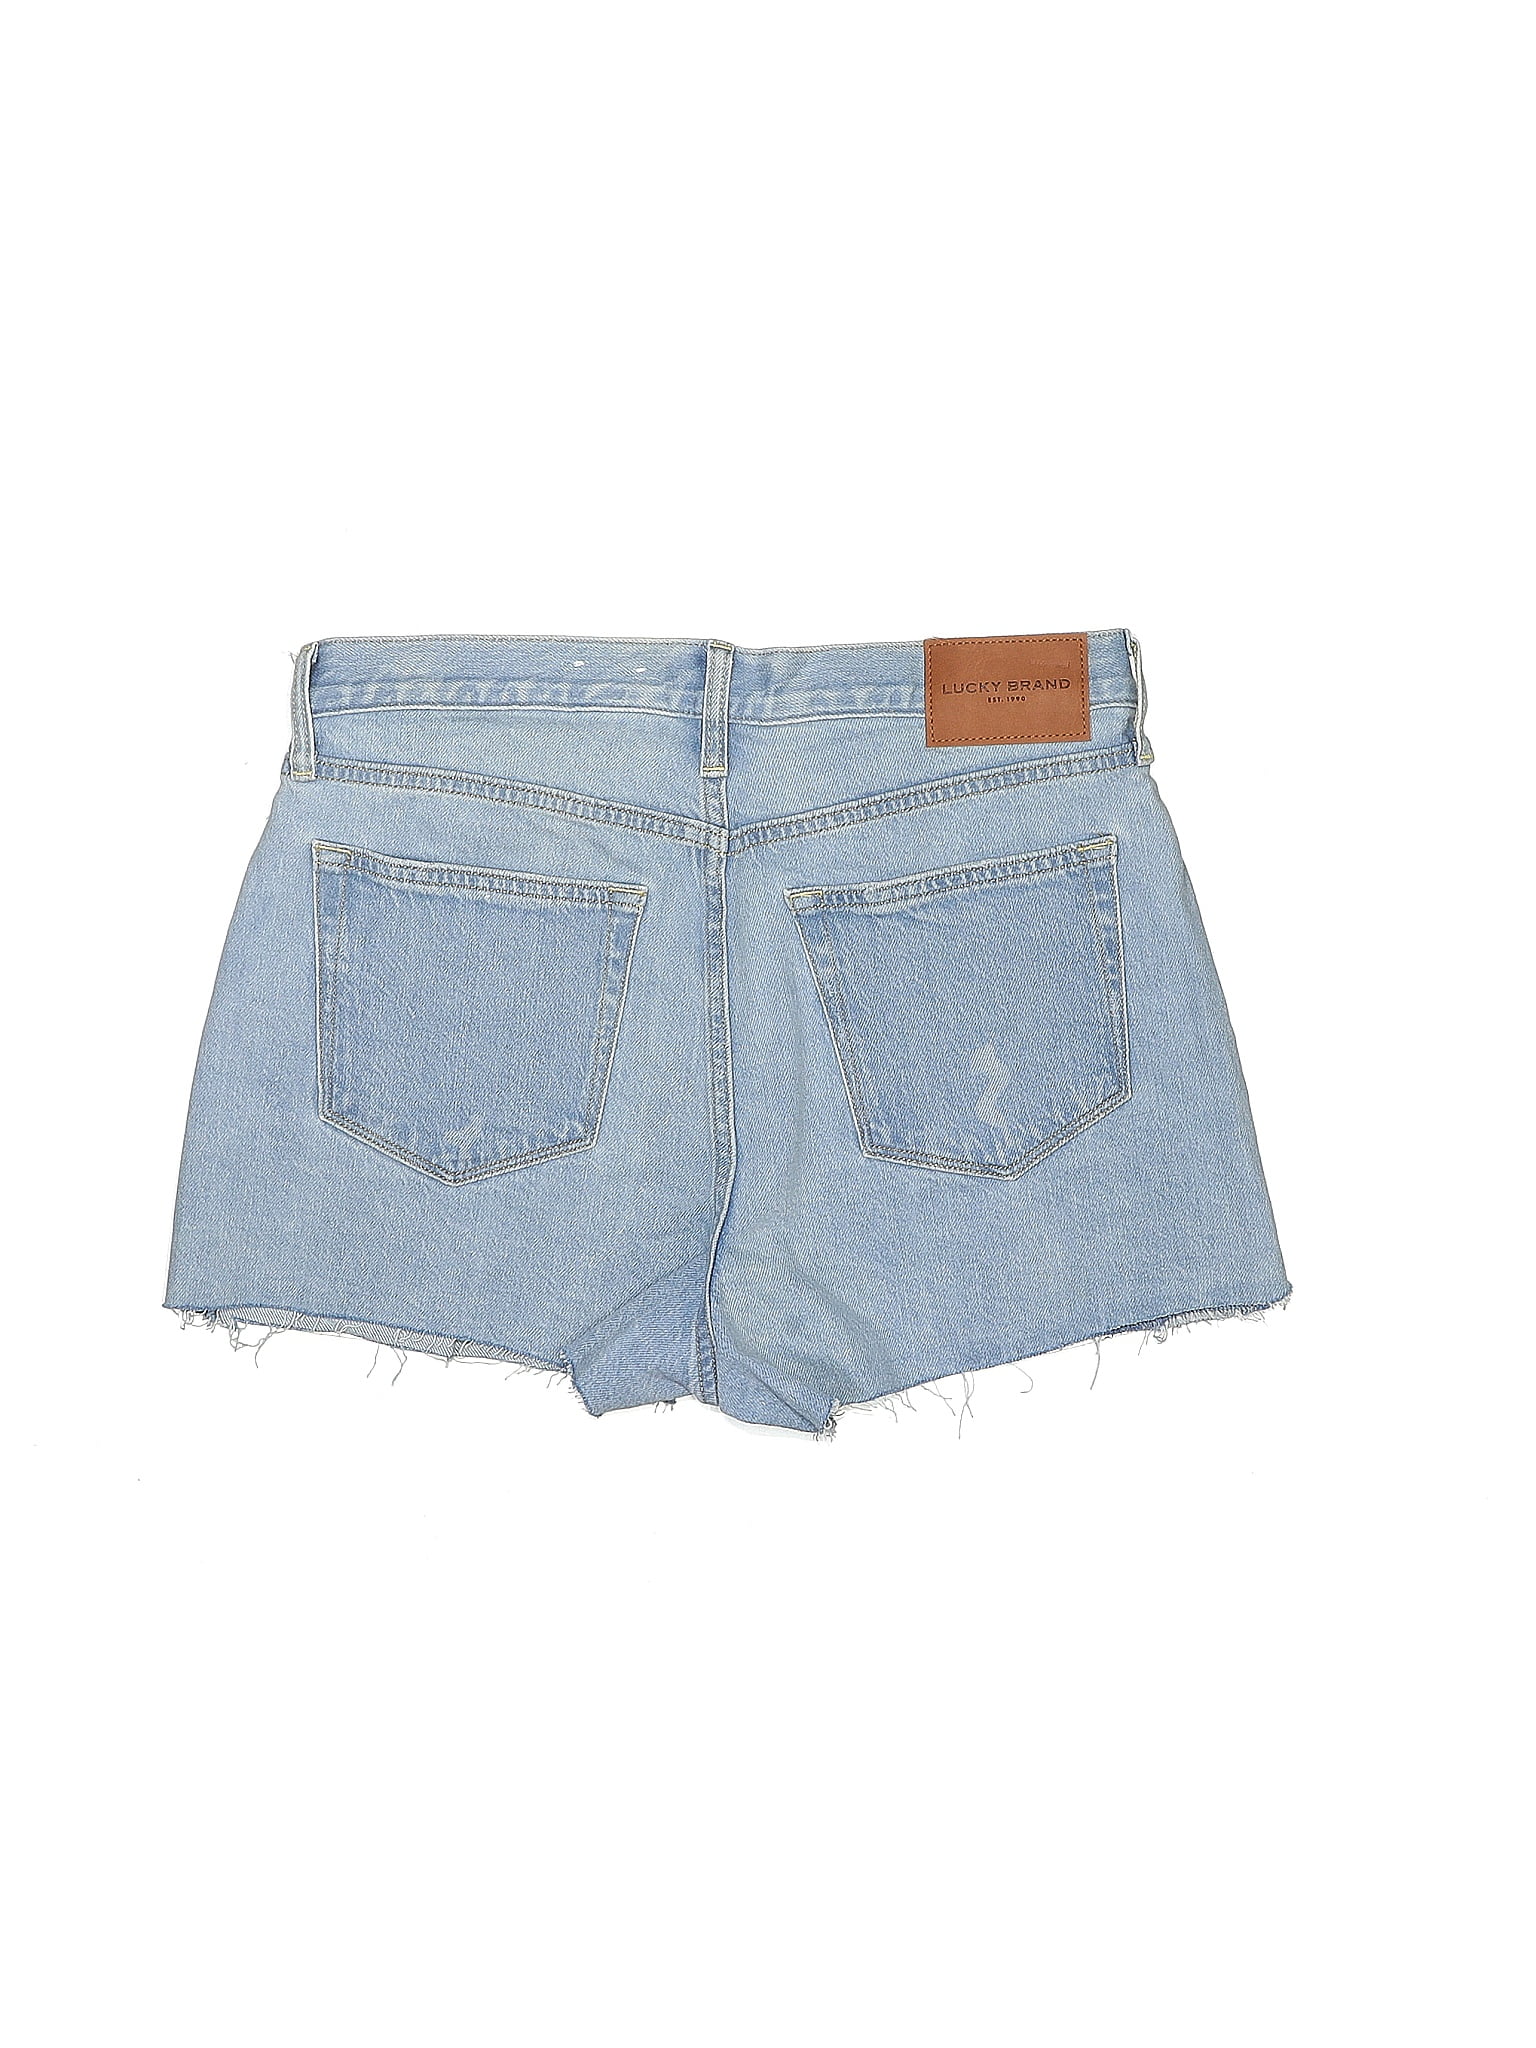 Lucky Brand Solid Blue Denim Shorts Size 4 - 67% off